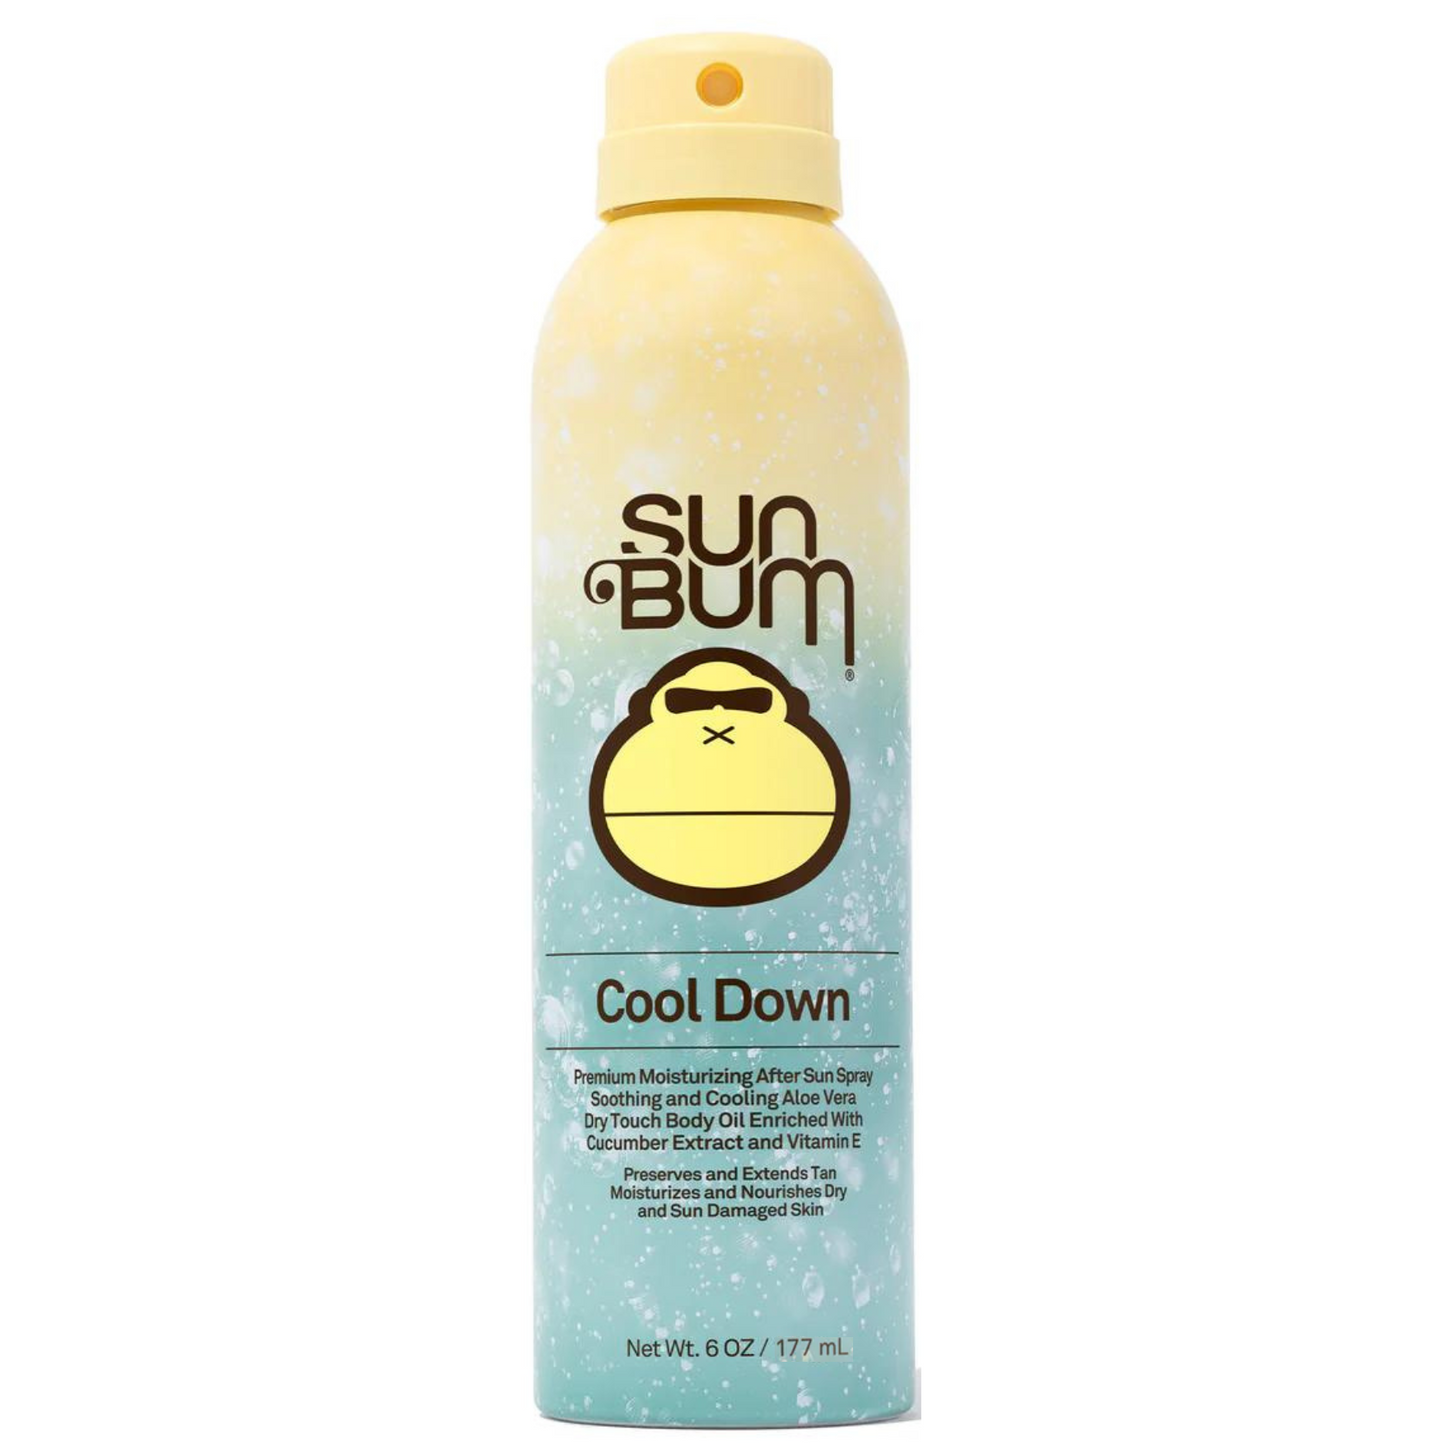 Sun Bum Cool Down Premium Moisturizing After Sun Spray Soothing and Cooling Aloe Vera 6 oz/ 170g